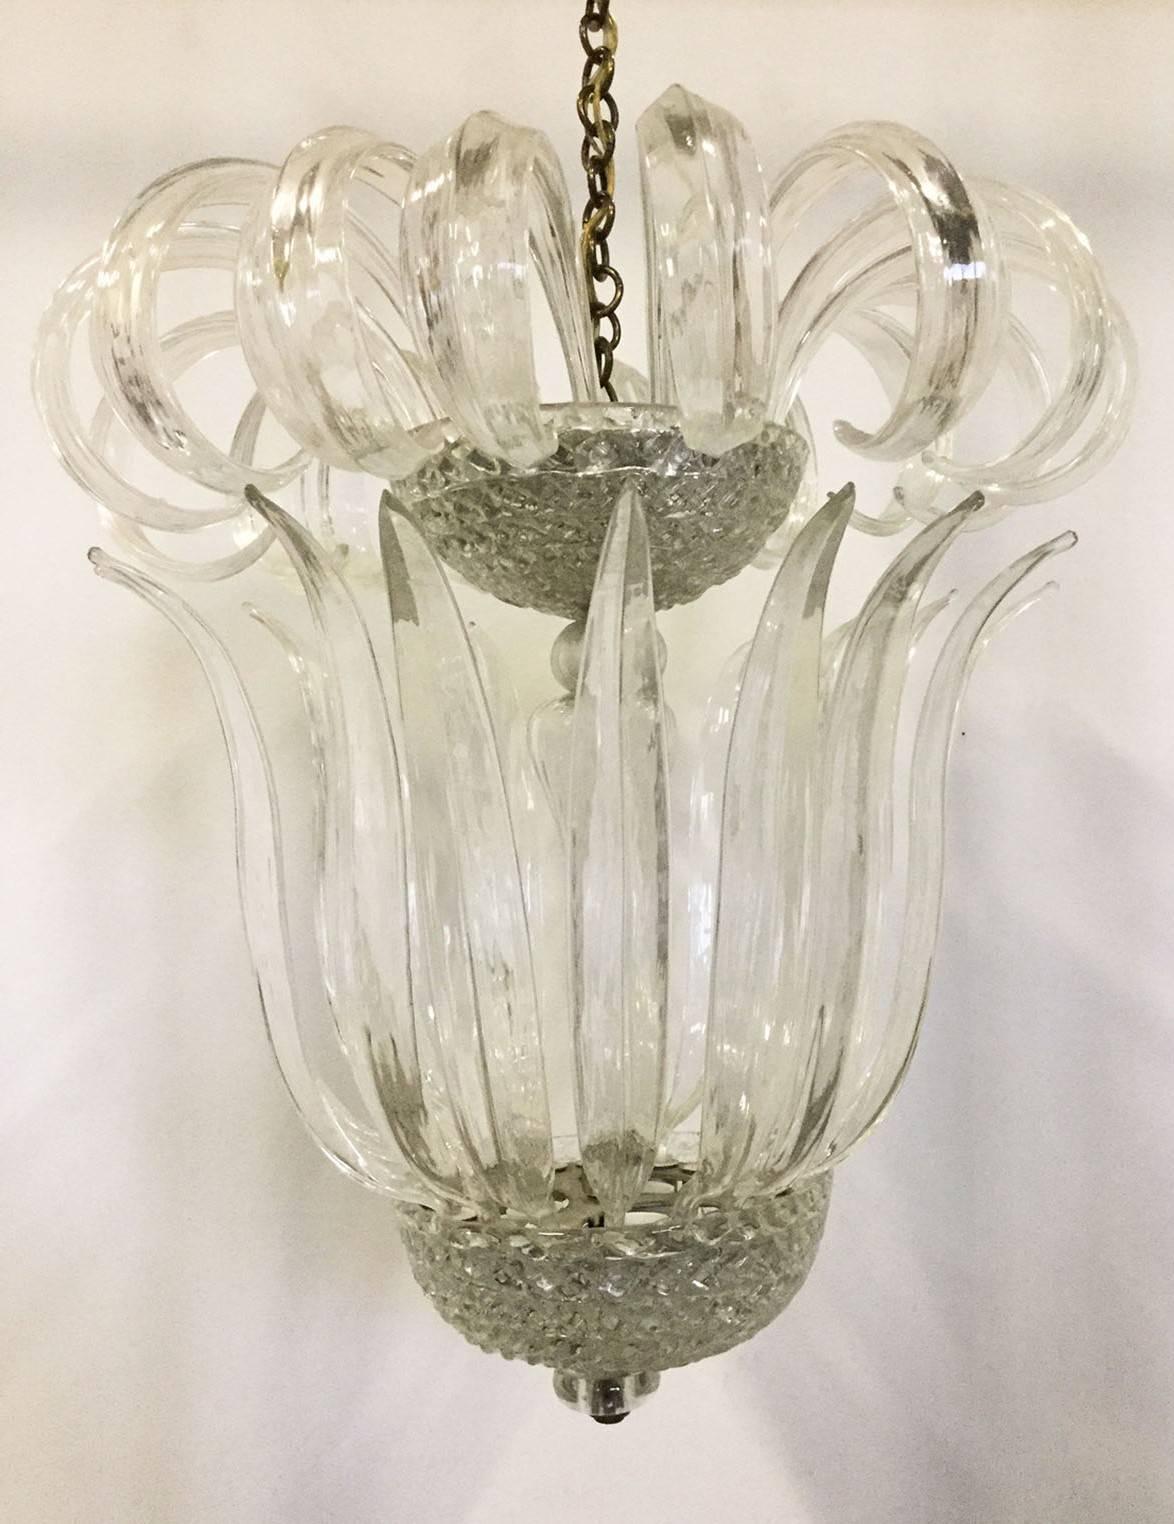 Classic and elegant chandelier, blown glass leaves grafted on beveled glass cups which hide the lights, glass stem with electric wire inside.
Original in all parts this model is made by Venini in 1940.